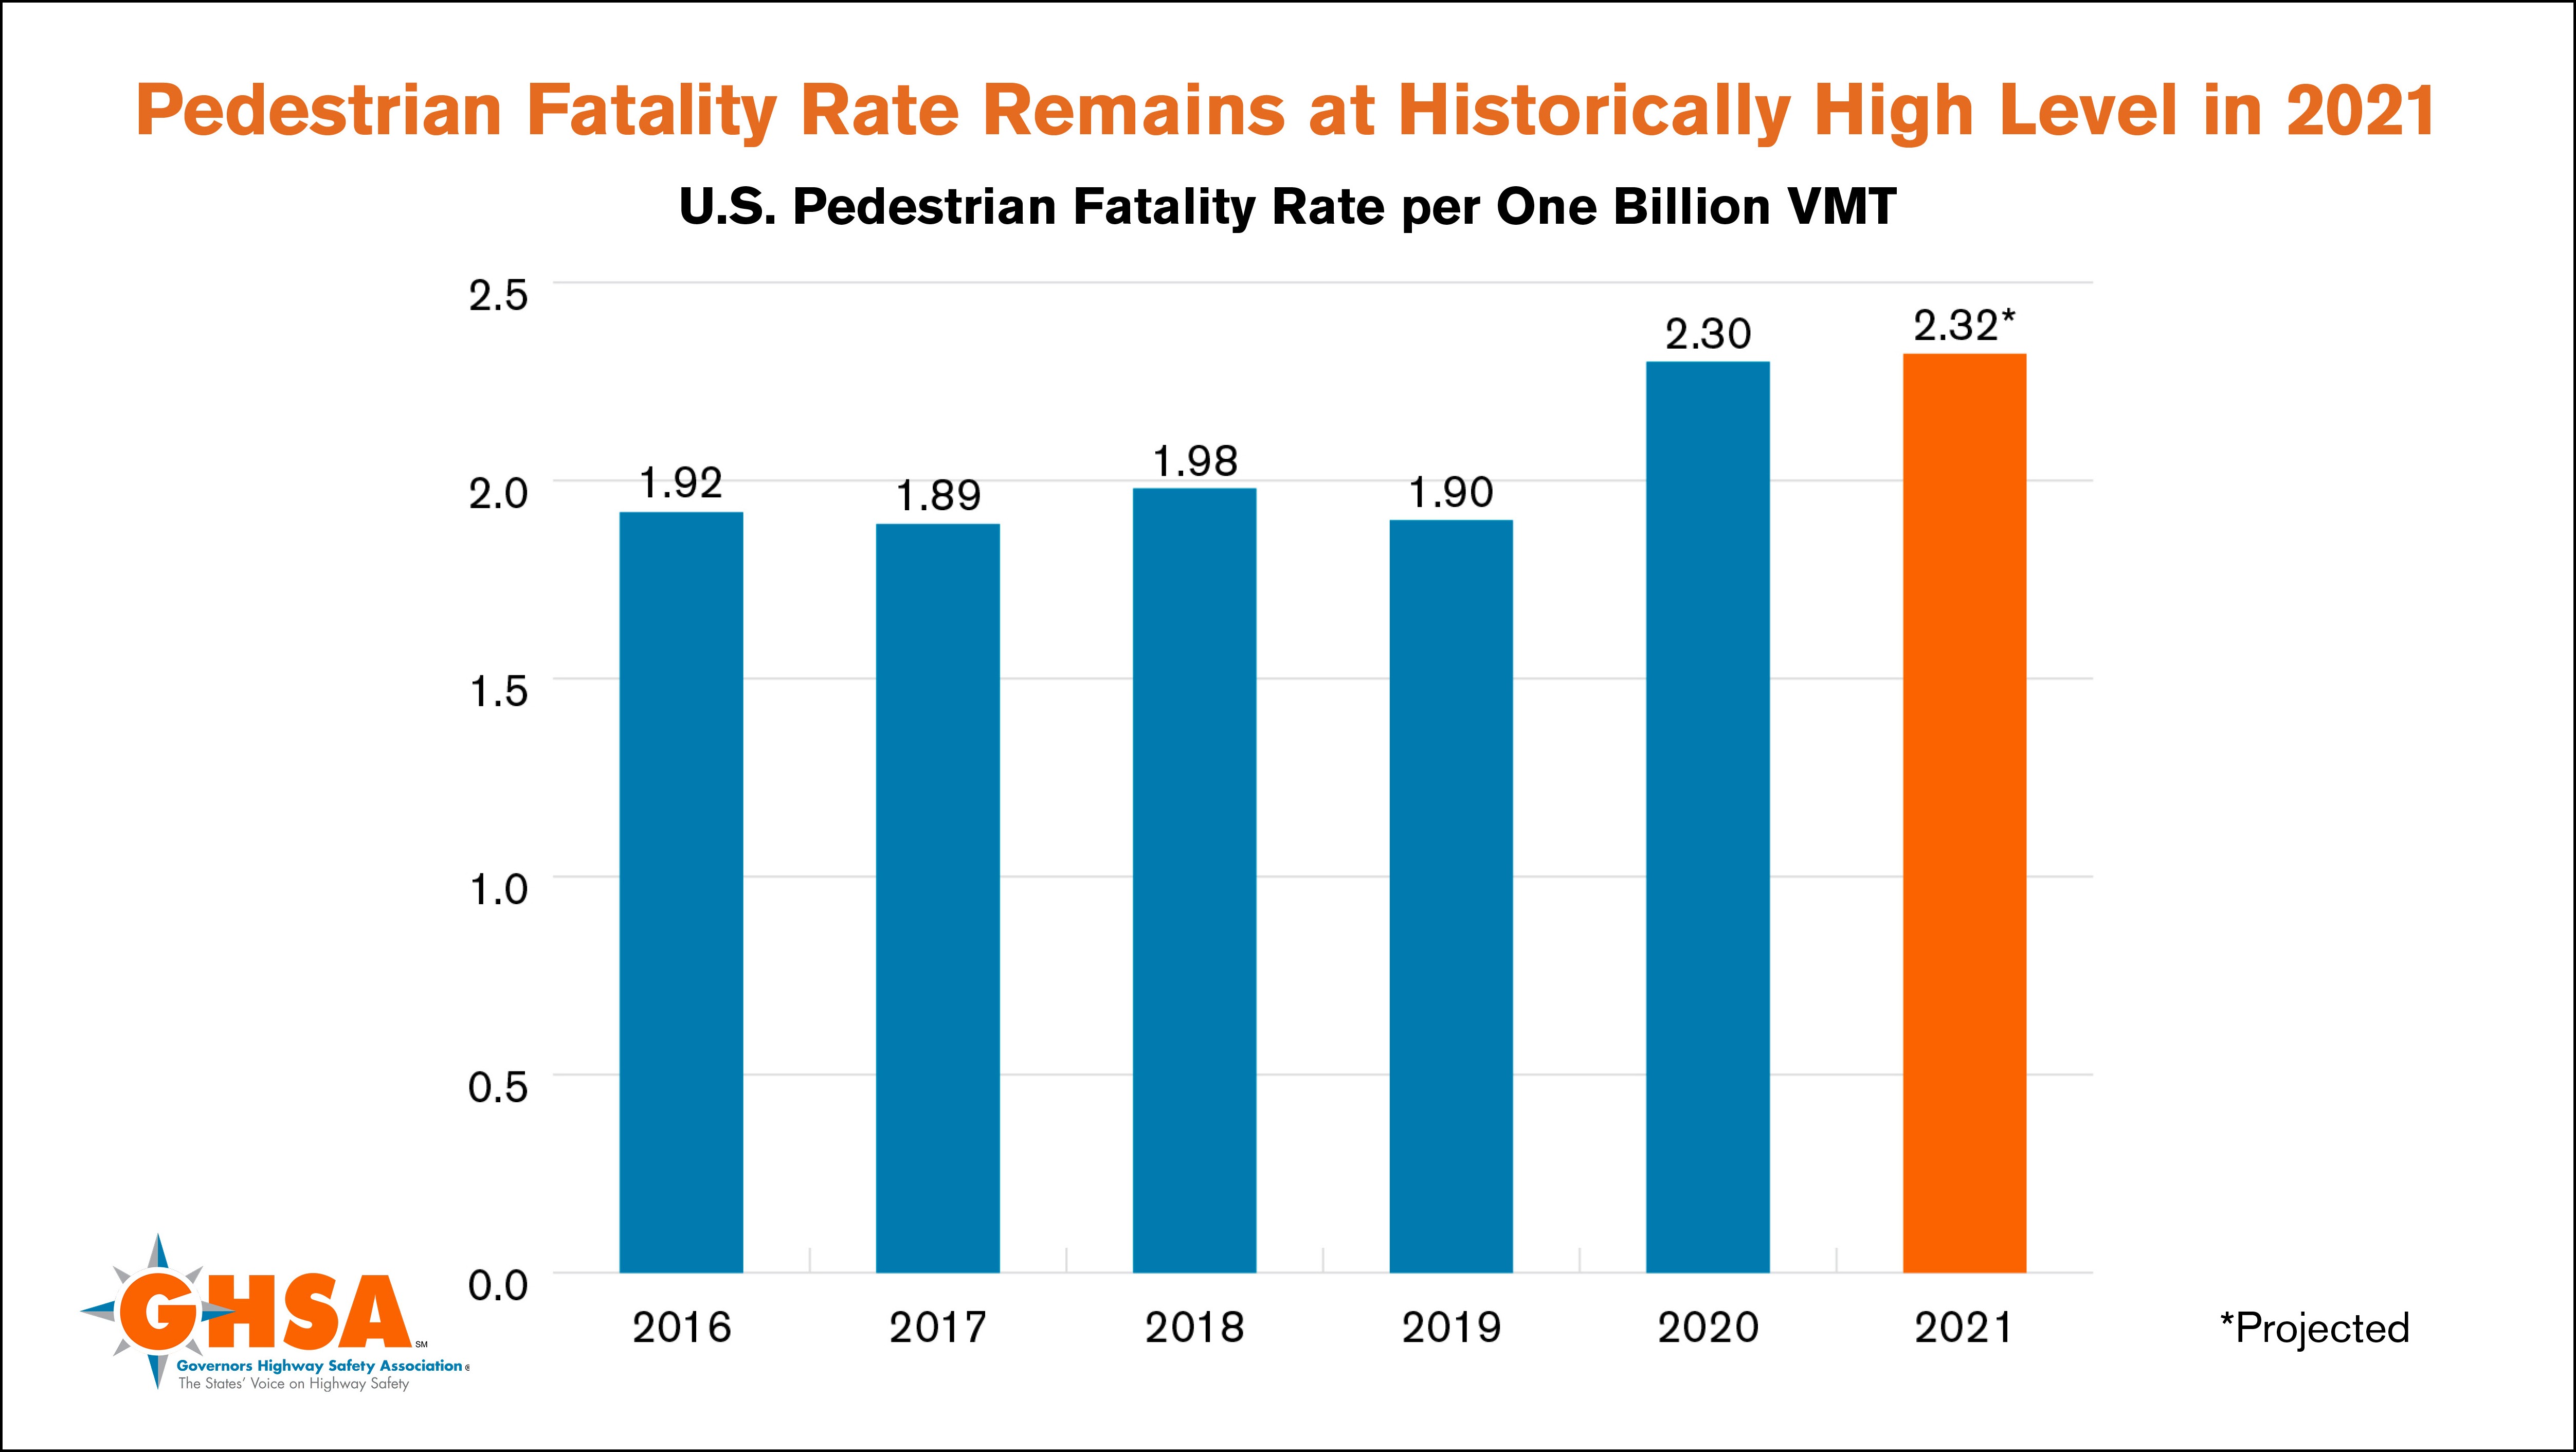 Pedestrian Fatality Rate Remains at Historically High Level in 2021